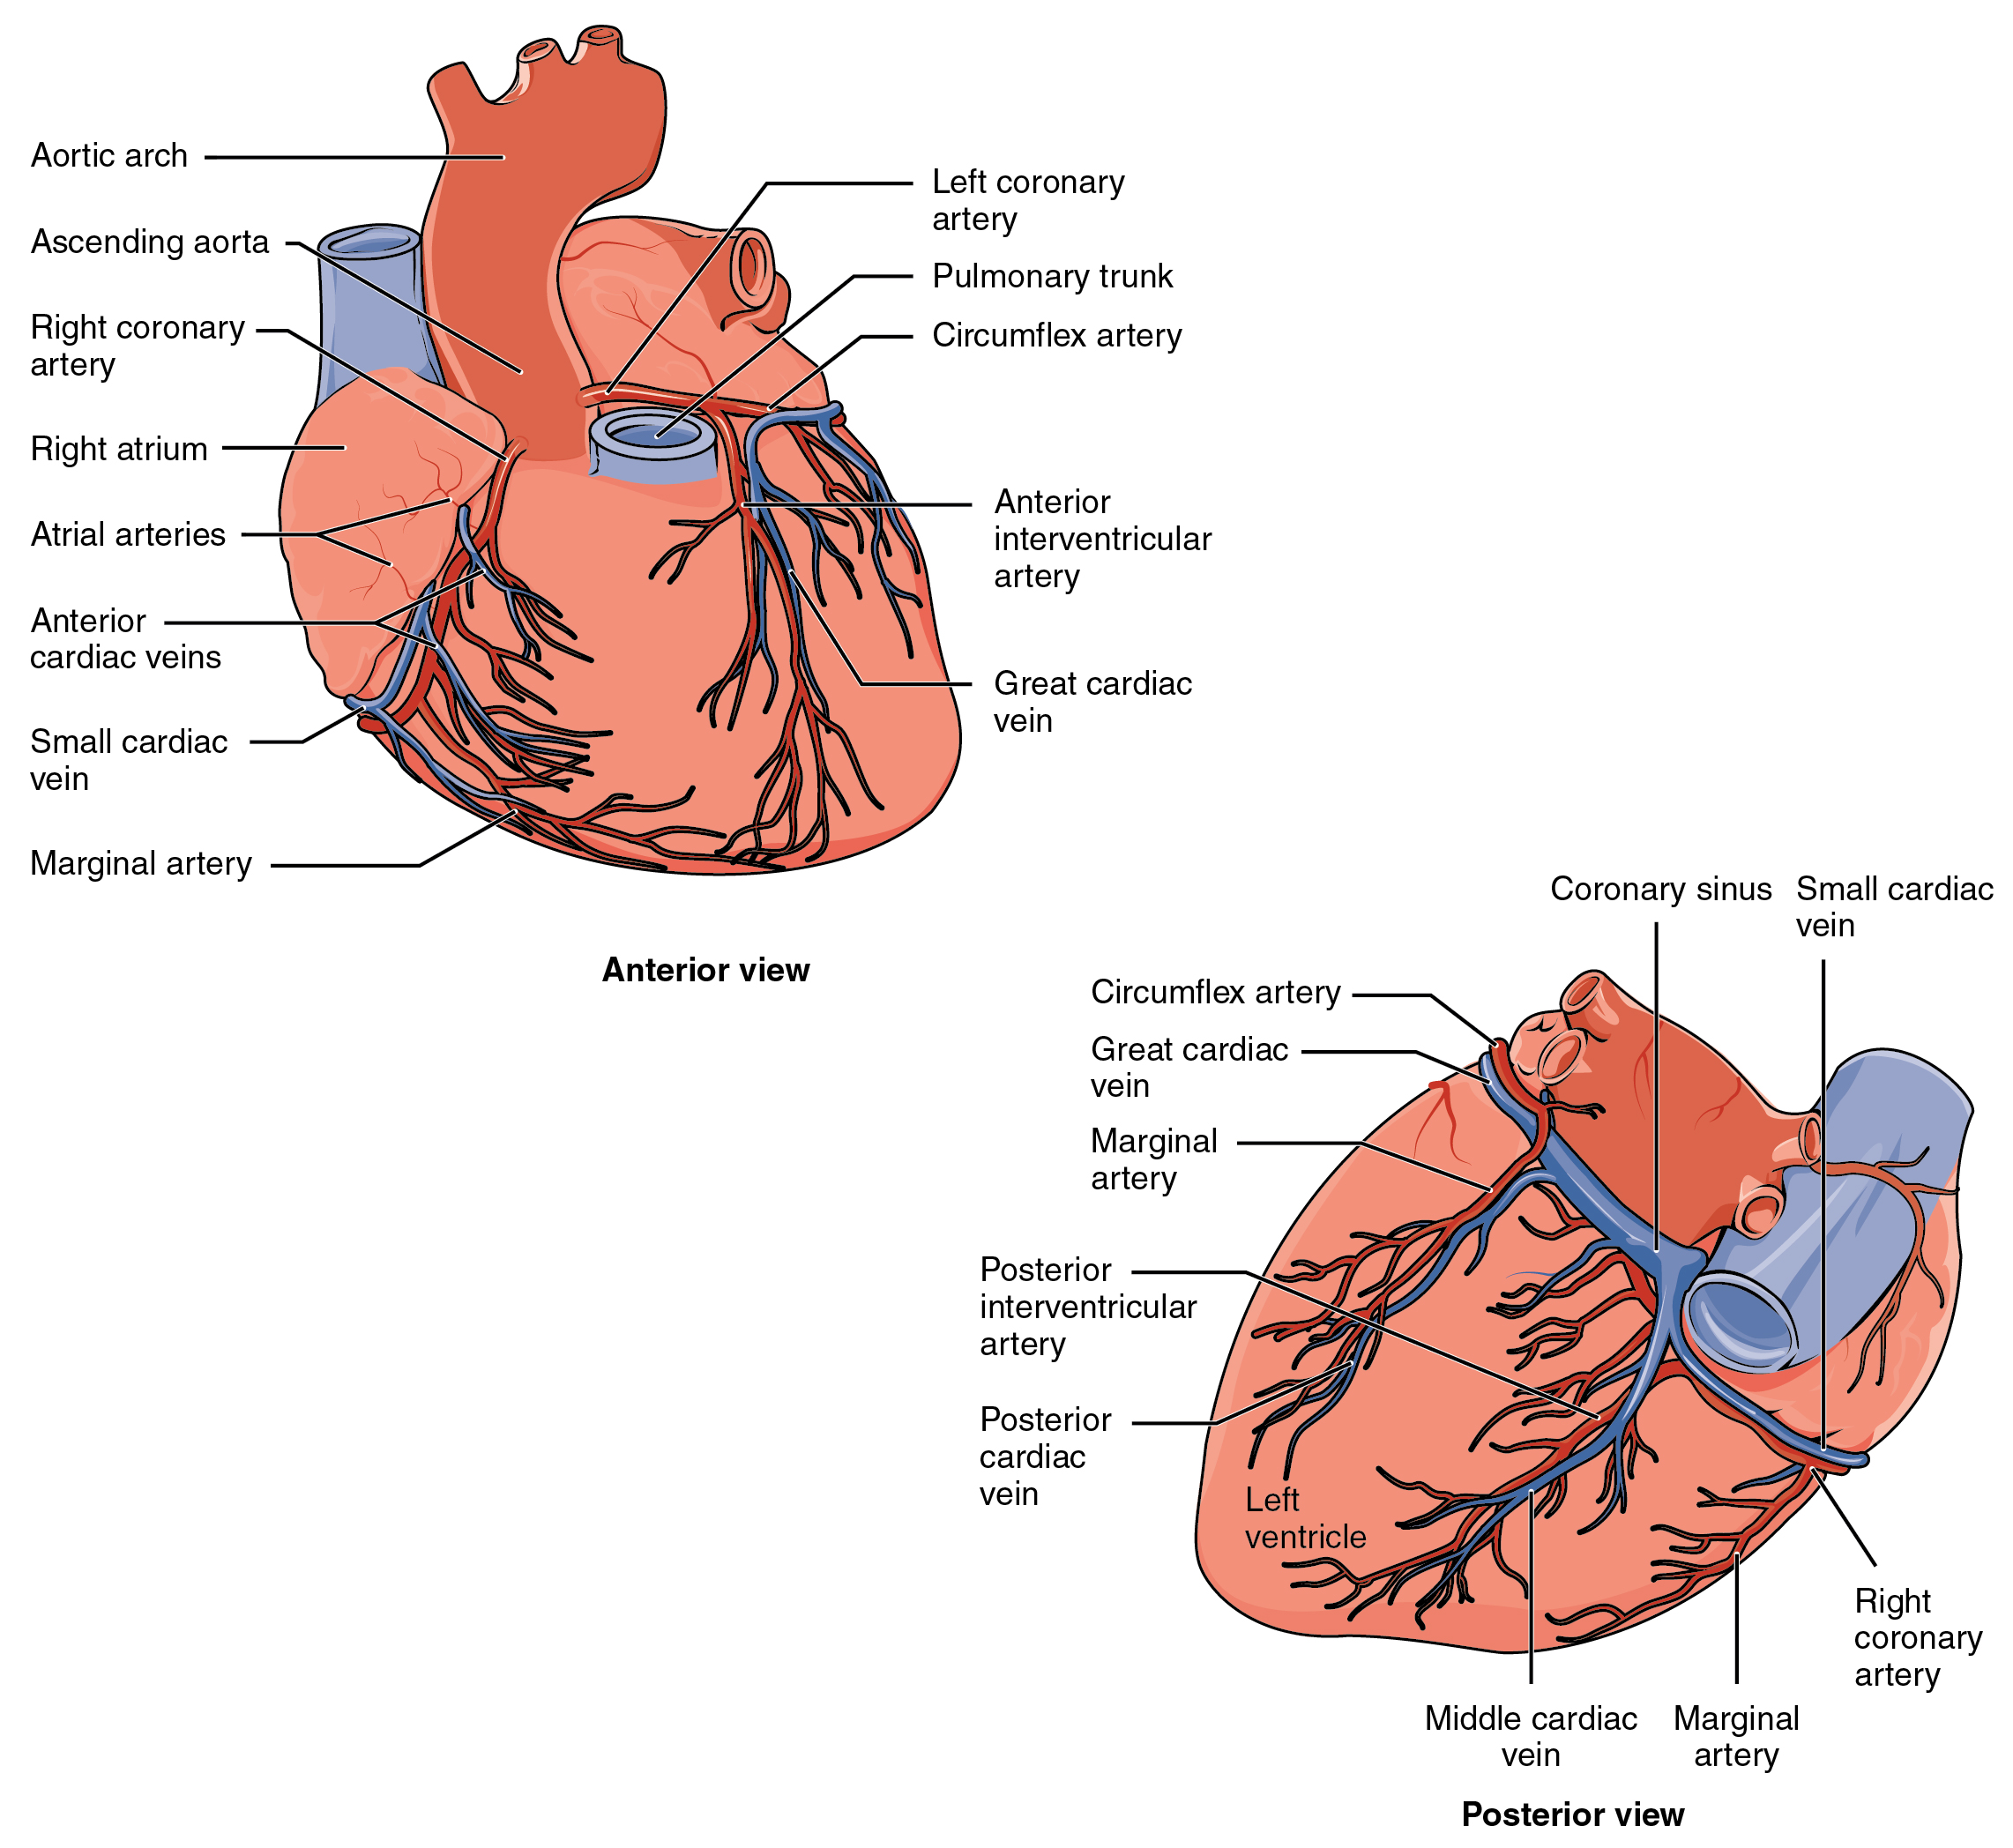 The top panel of this figure shows the anterior view of the heart while the bottom panel shows the posterior view of the heart. The different blood vessels are labeled.